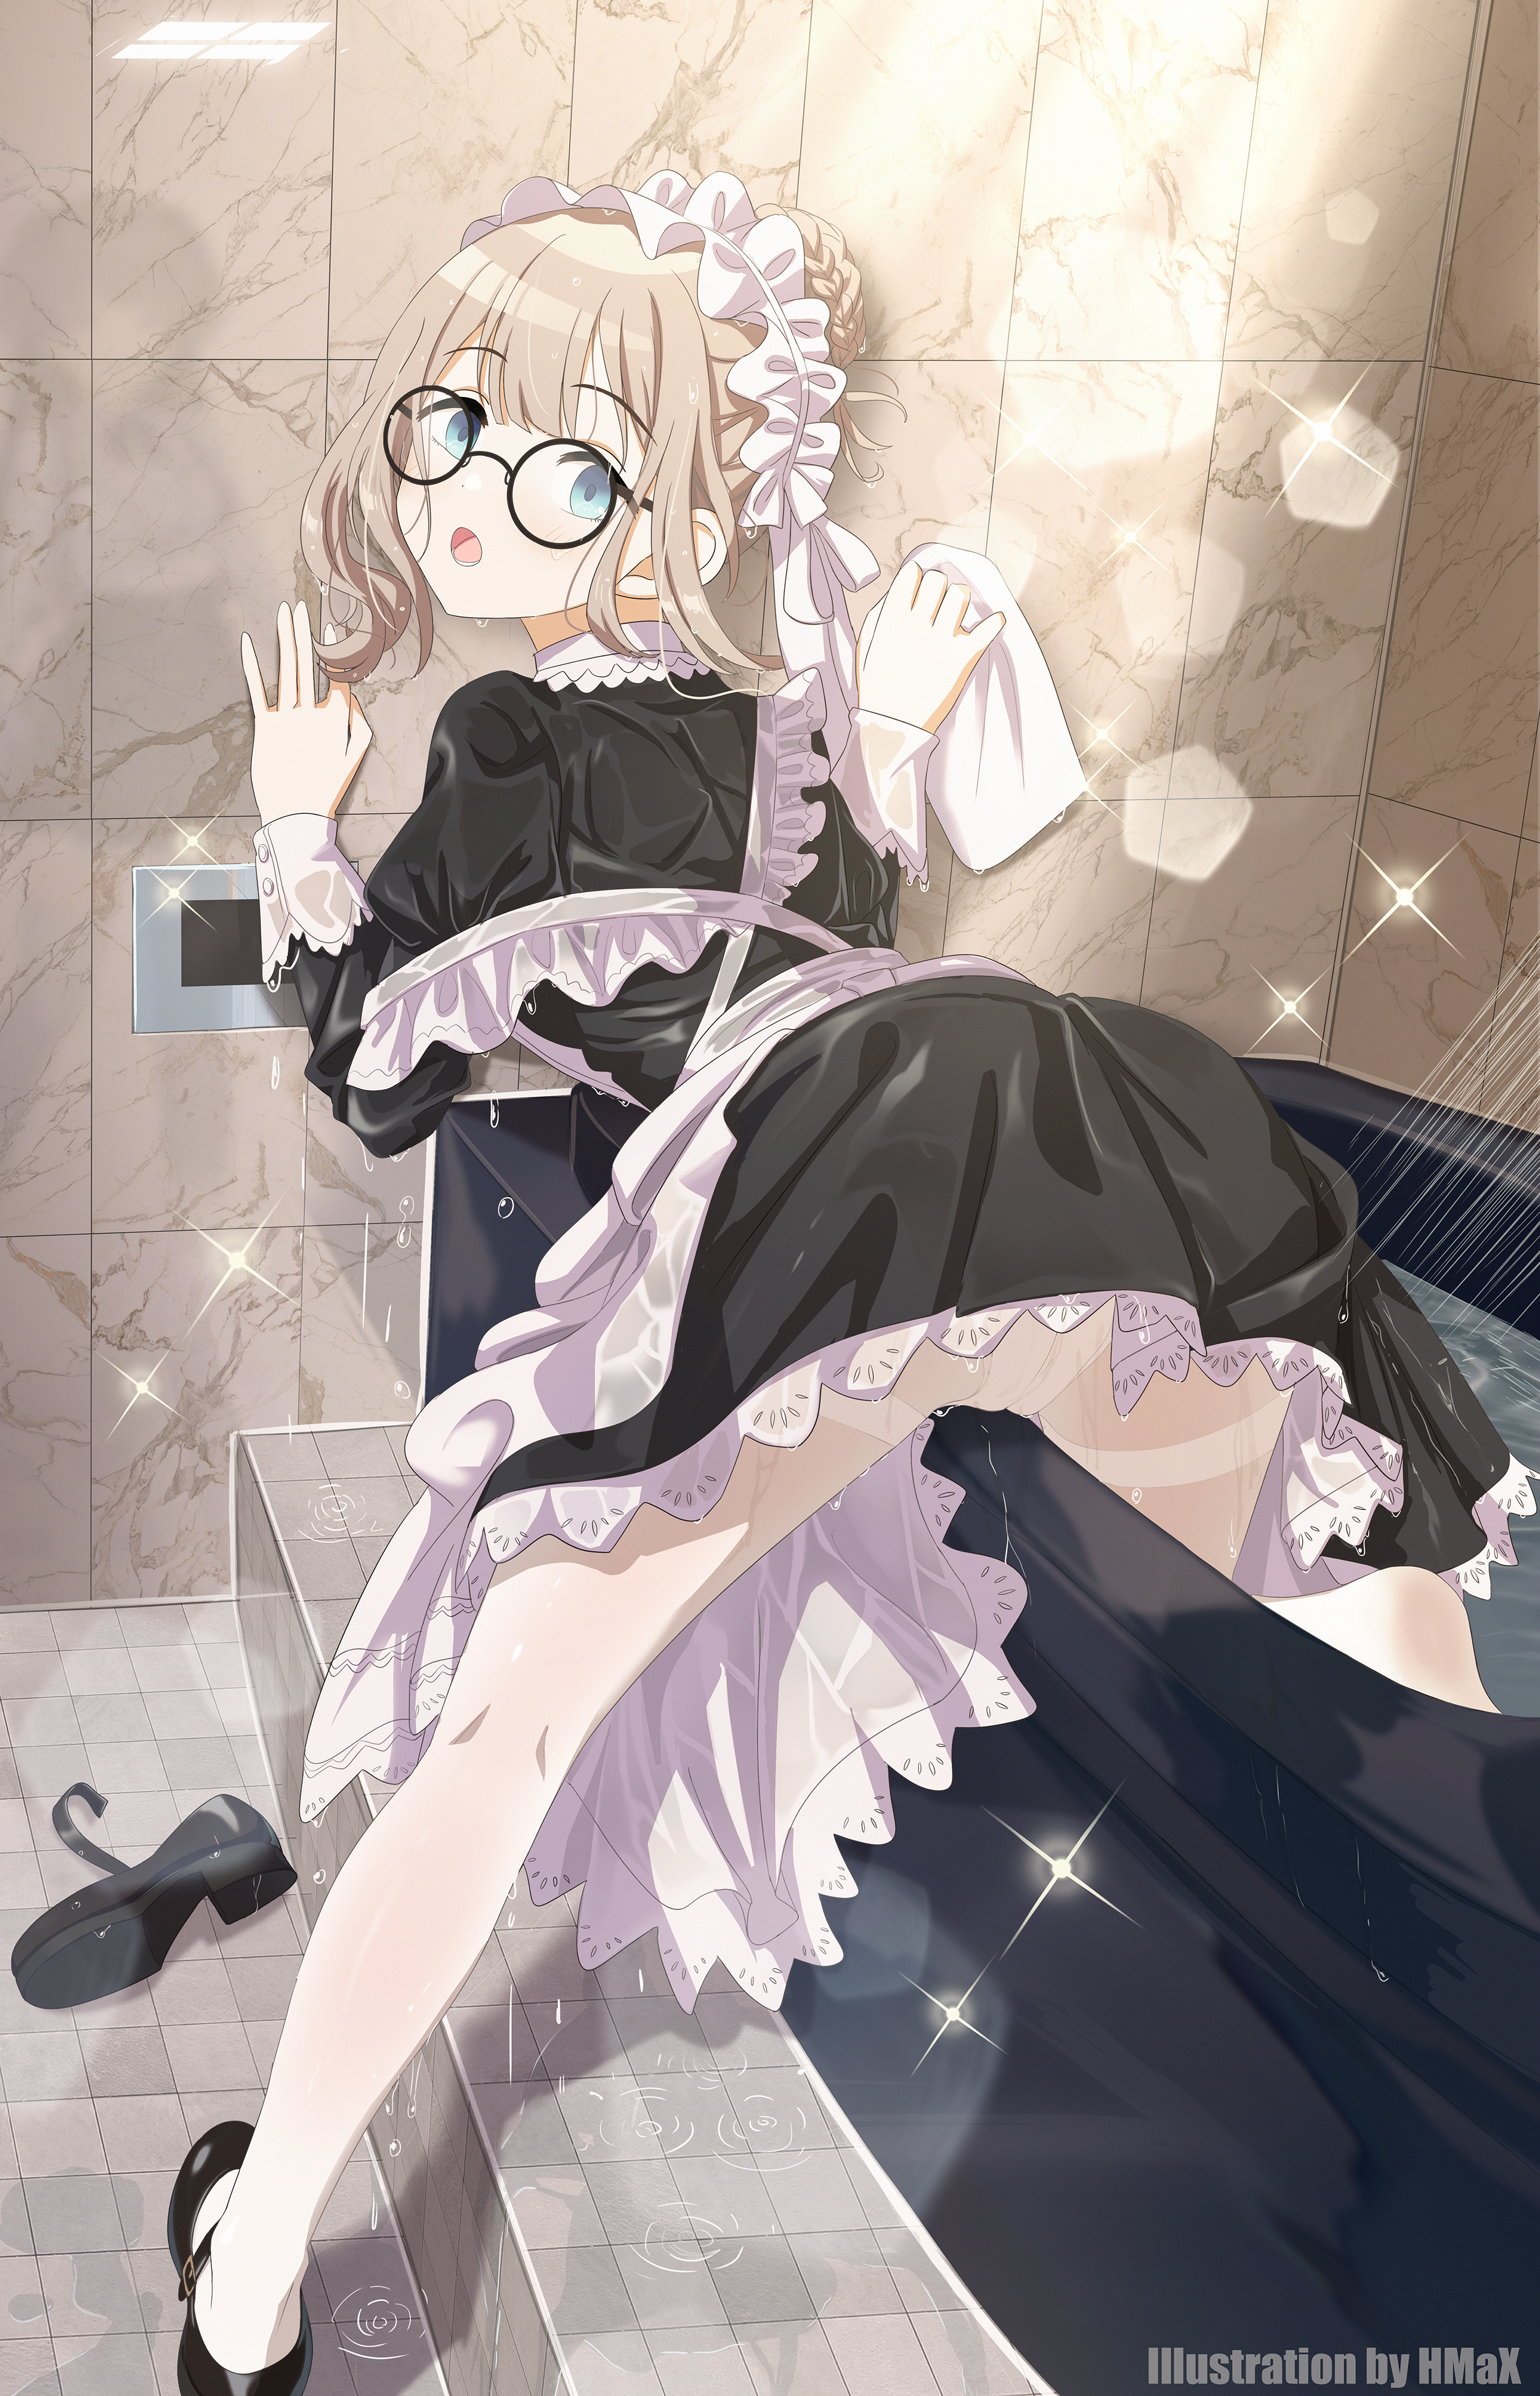 Anime 2500x3889 anime girls anime maid maid outfit bent over stars blonde blue eyes looking back towel looking at viewer heels watermarked bathtub water open mouth glasses portrait display pantyhose panties wet wet clothing shoes braids